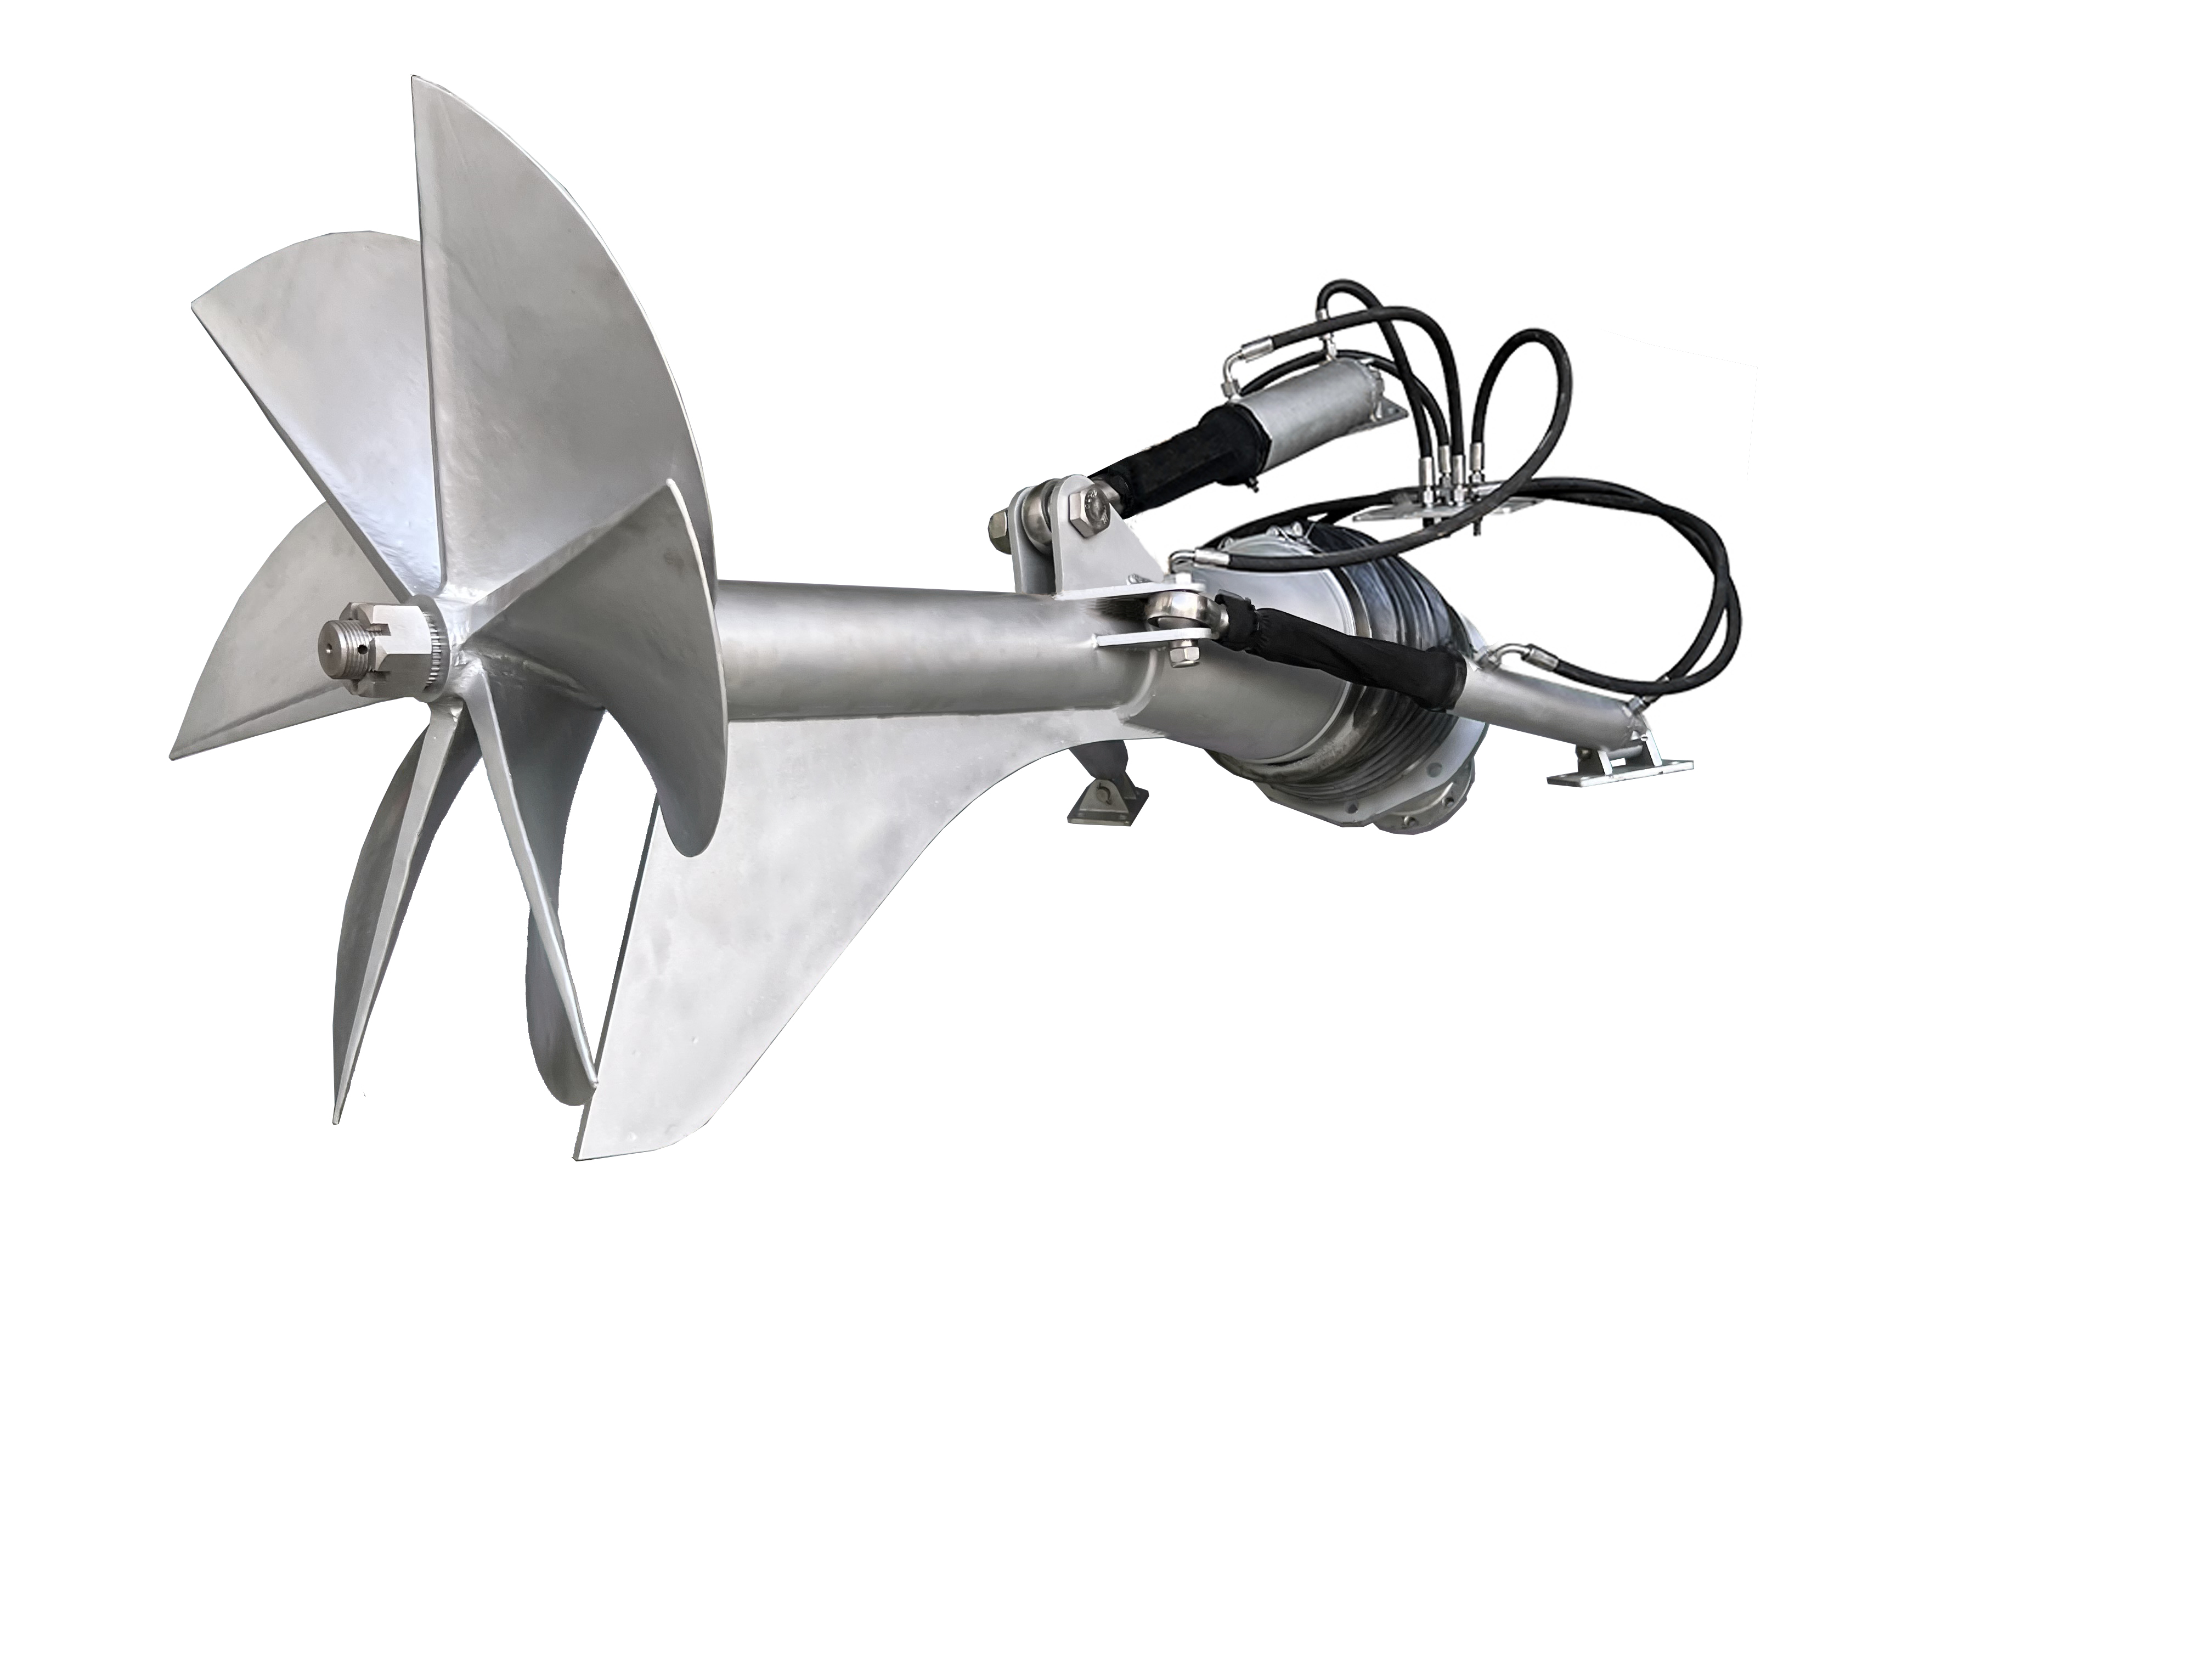 BH750L 1000Horsepower High Performance Surface Piercing Propeller High Quality Surface Drive